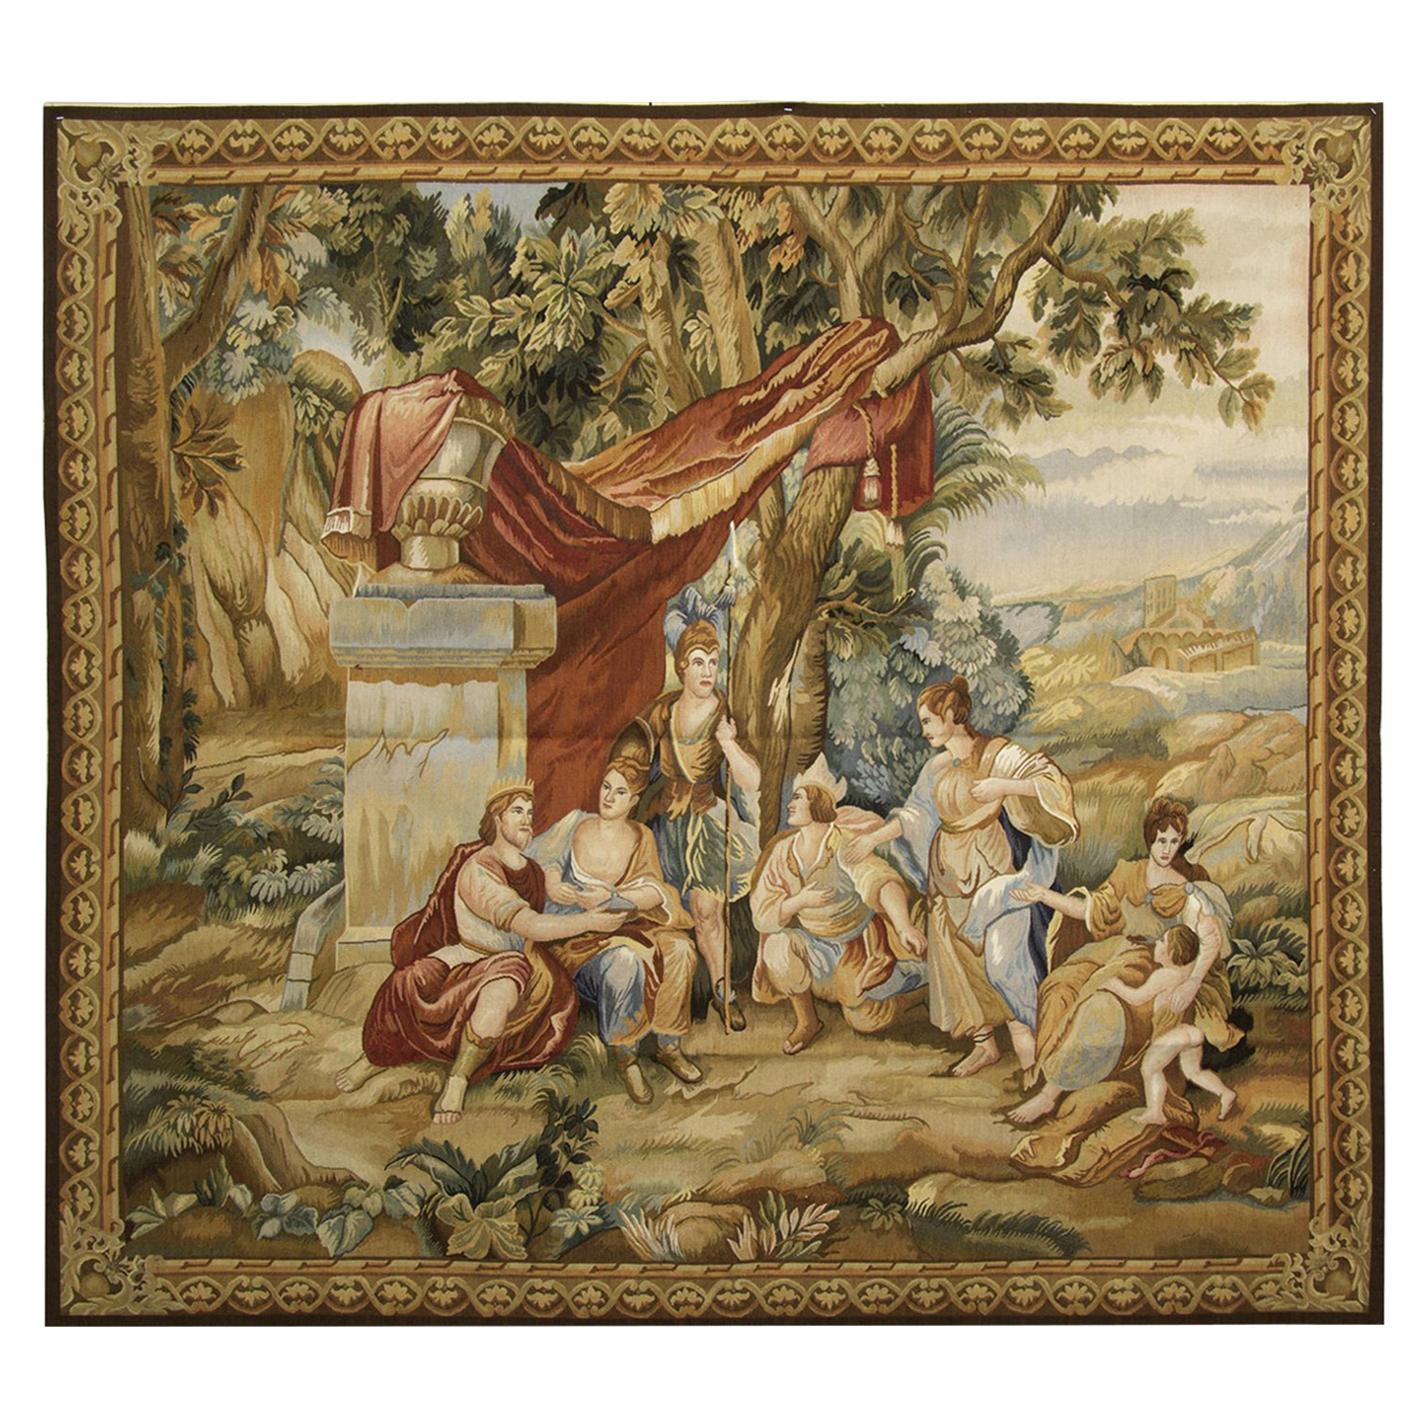 Rare Tapestry Rug Wall Hanging Carpet, Rugs French Aubusson, Garden Sence